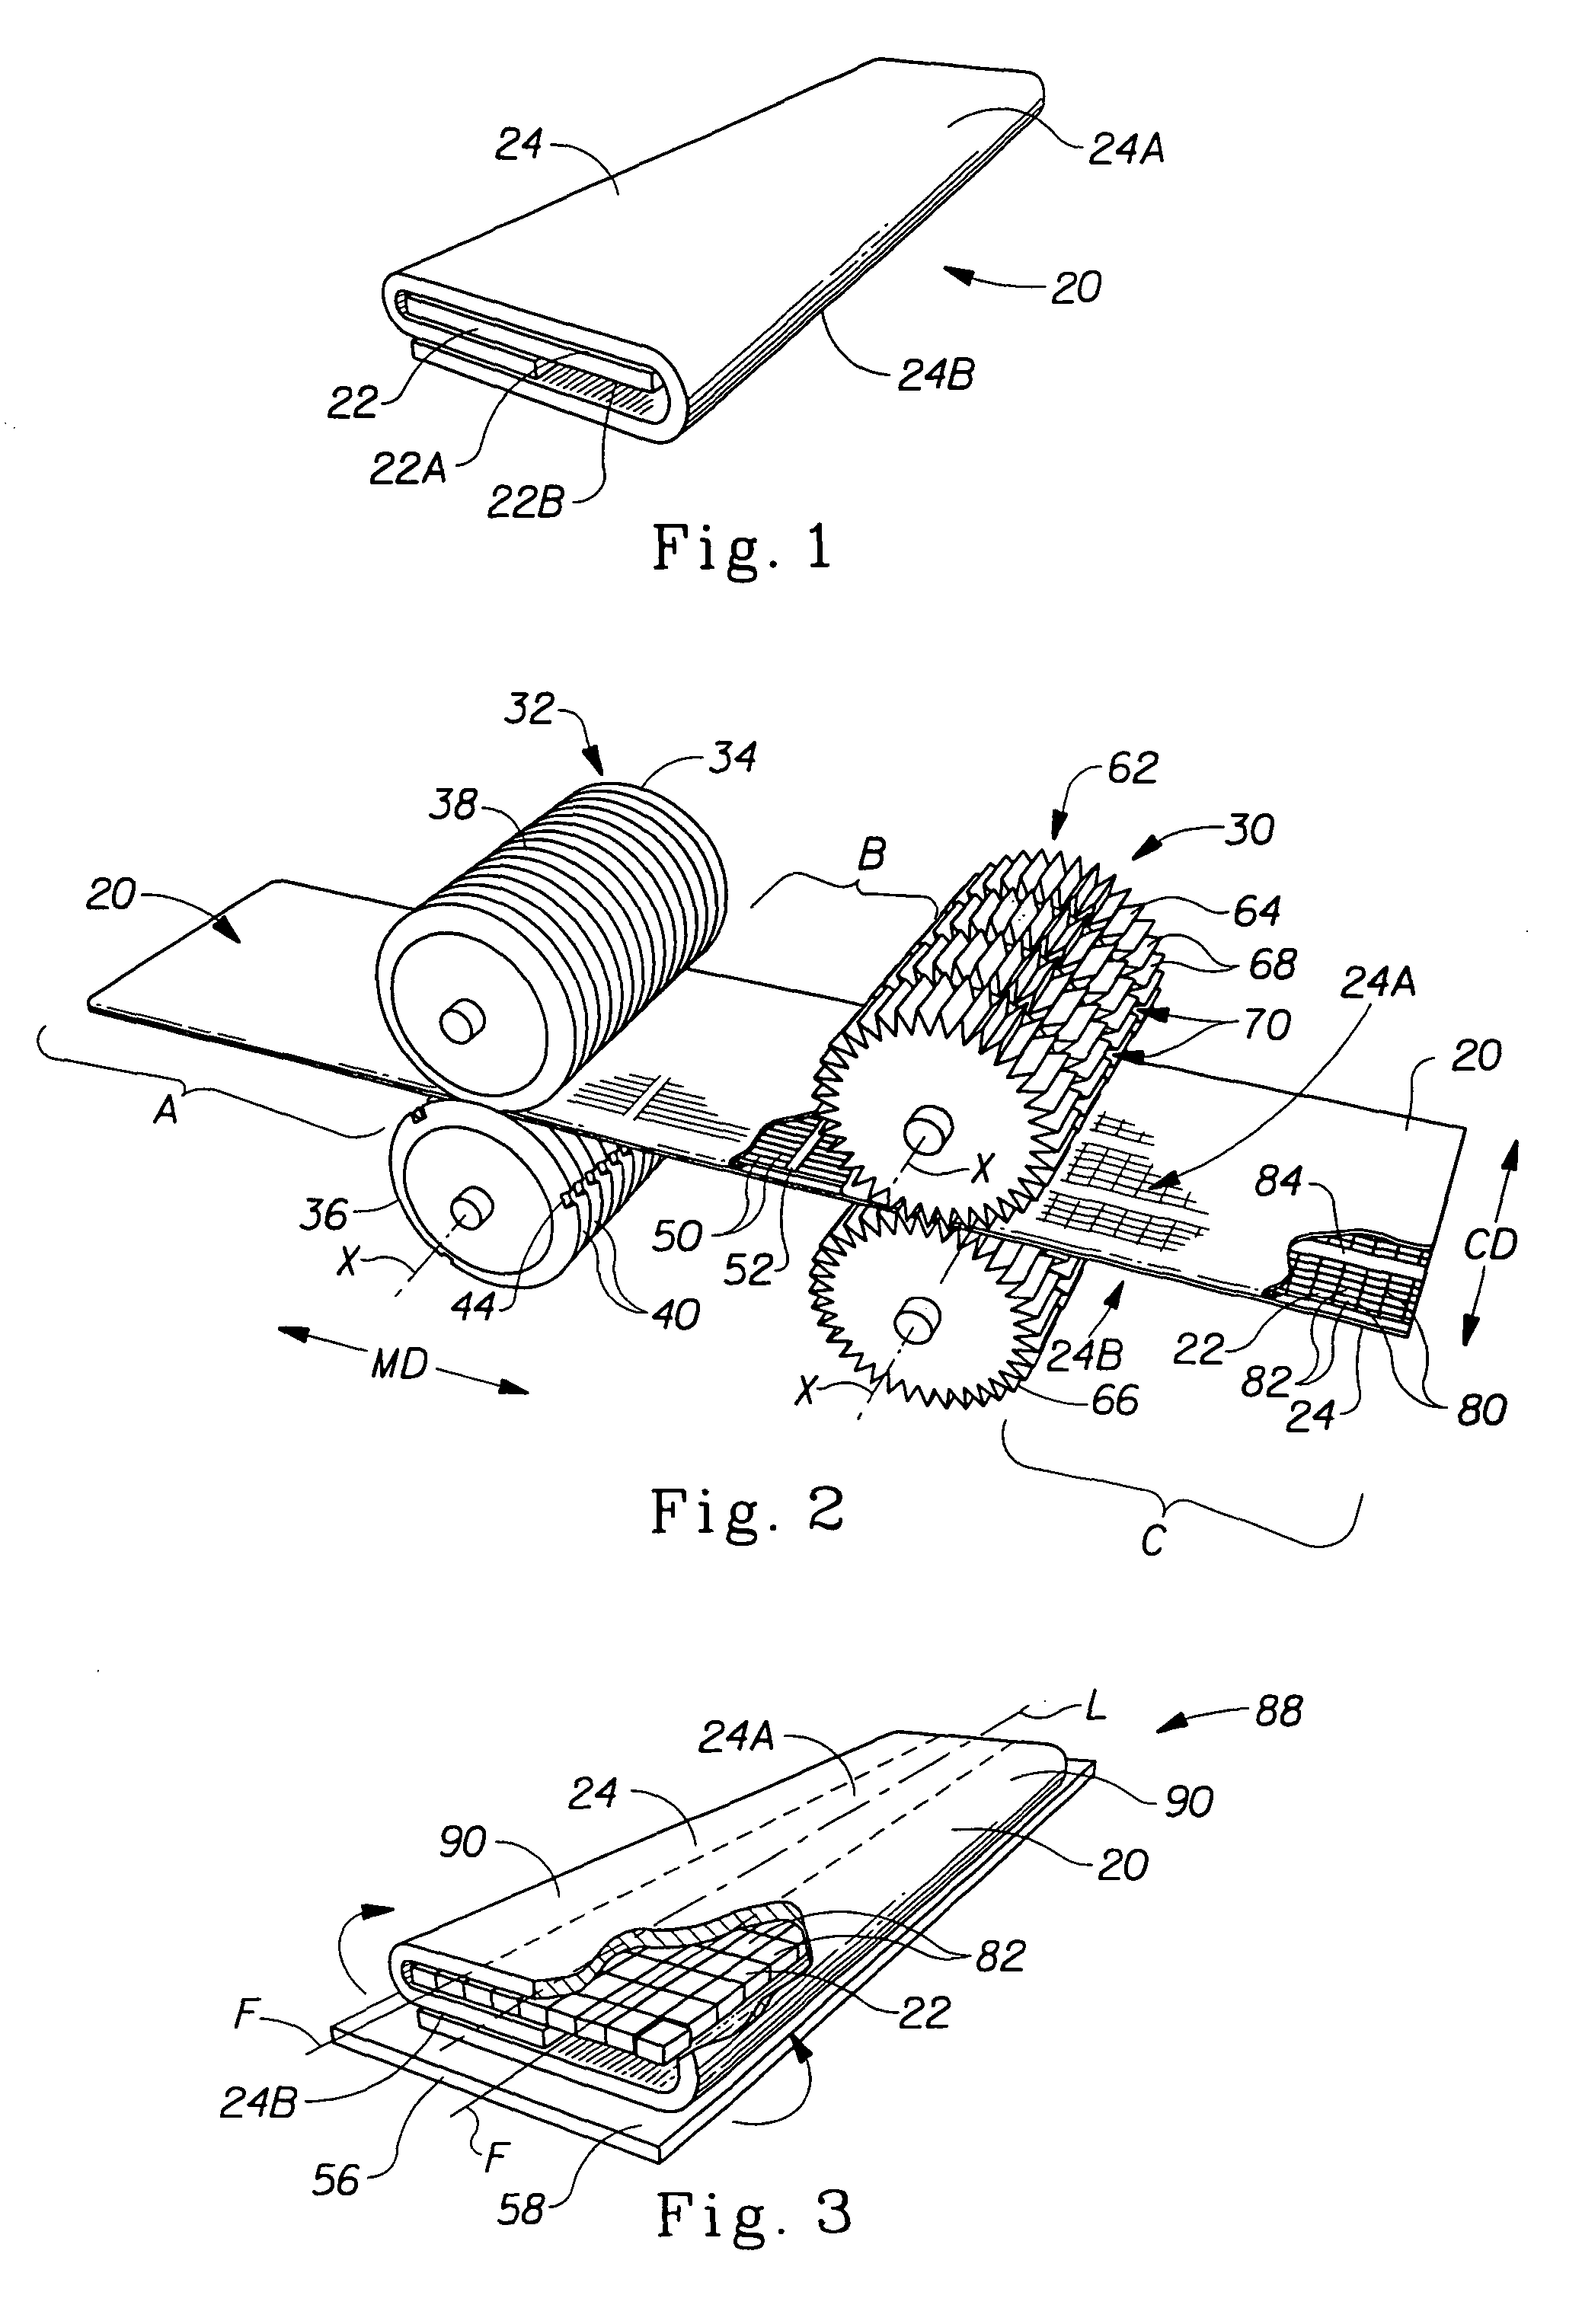 Methods of bonding materials, especially materials used in absorbent articles